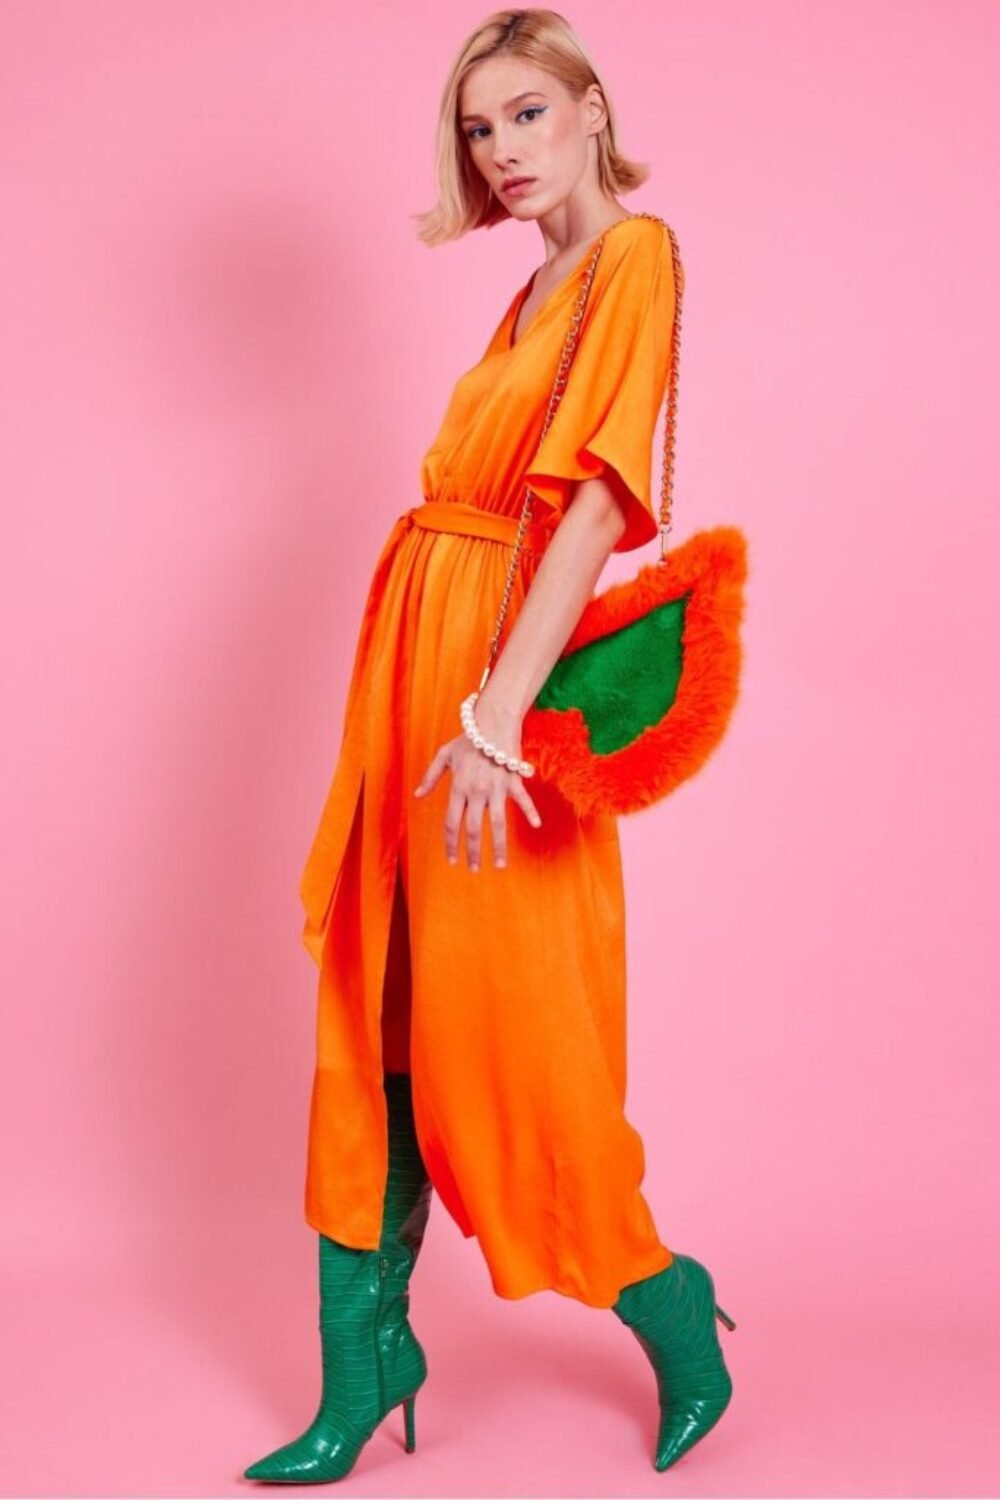 Shop Lux Orange Silk Blend Maxi Ruffle Dress and women's luxury and designer clothes at www.lux-apparel.co.uk